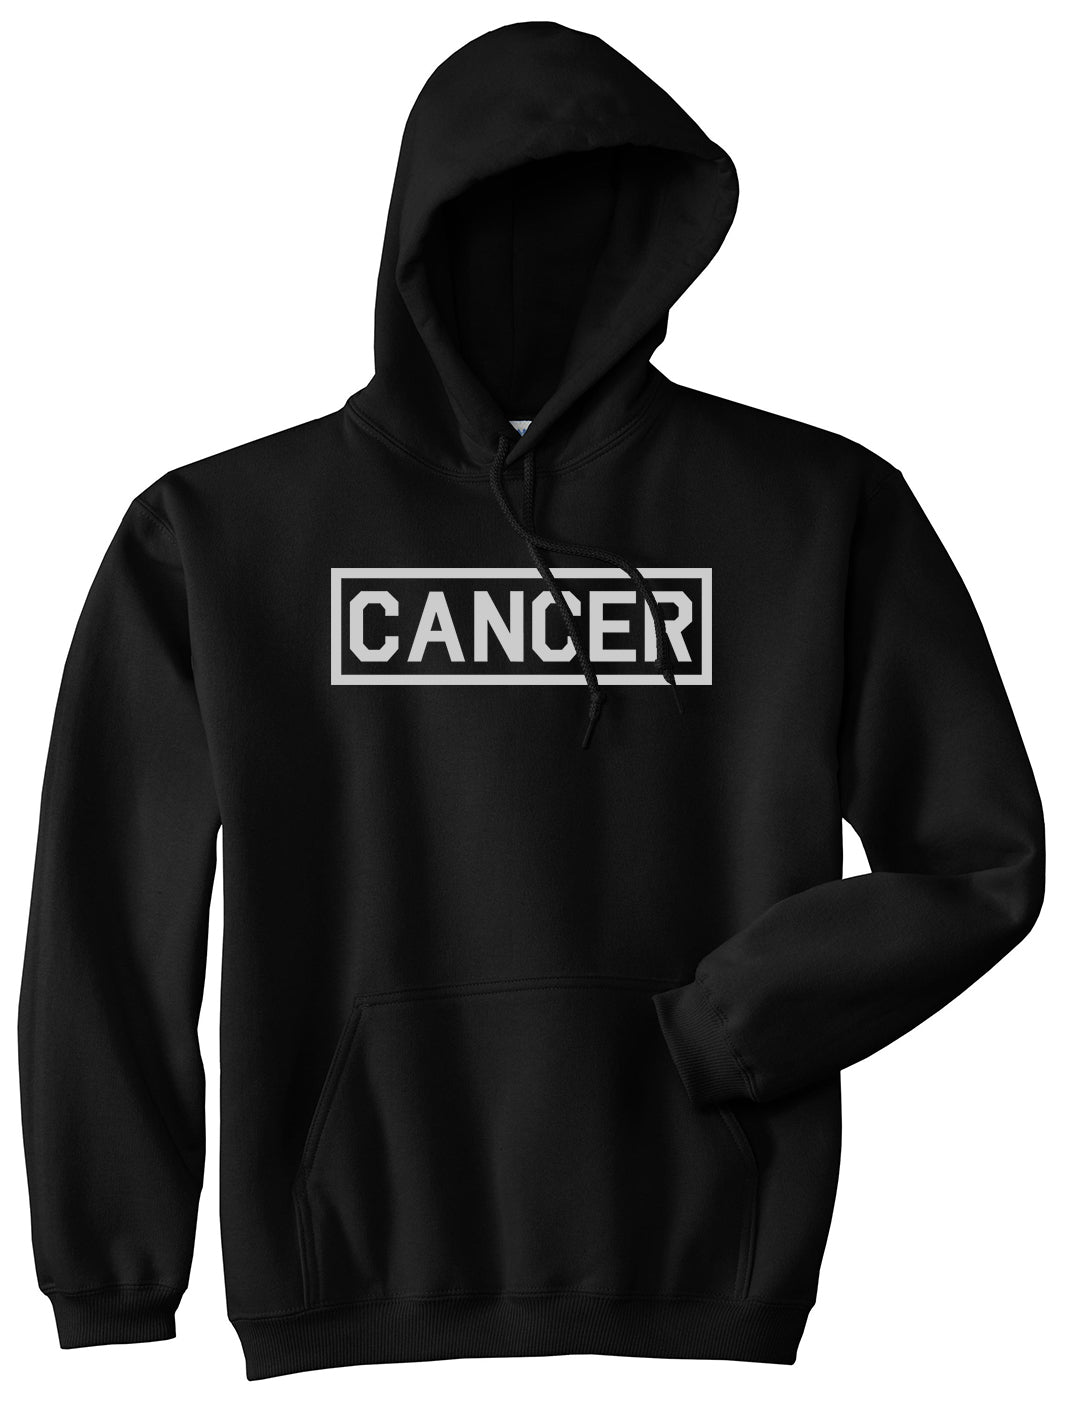 Cancer Horoscope Sign Mens Black Pullover Hoodie by KINGS OF NY